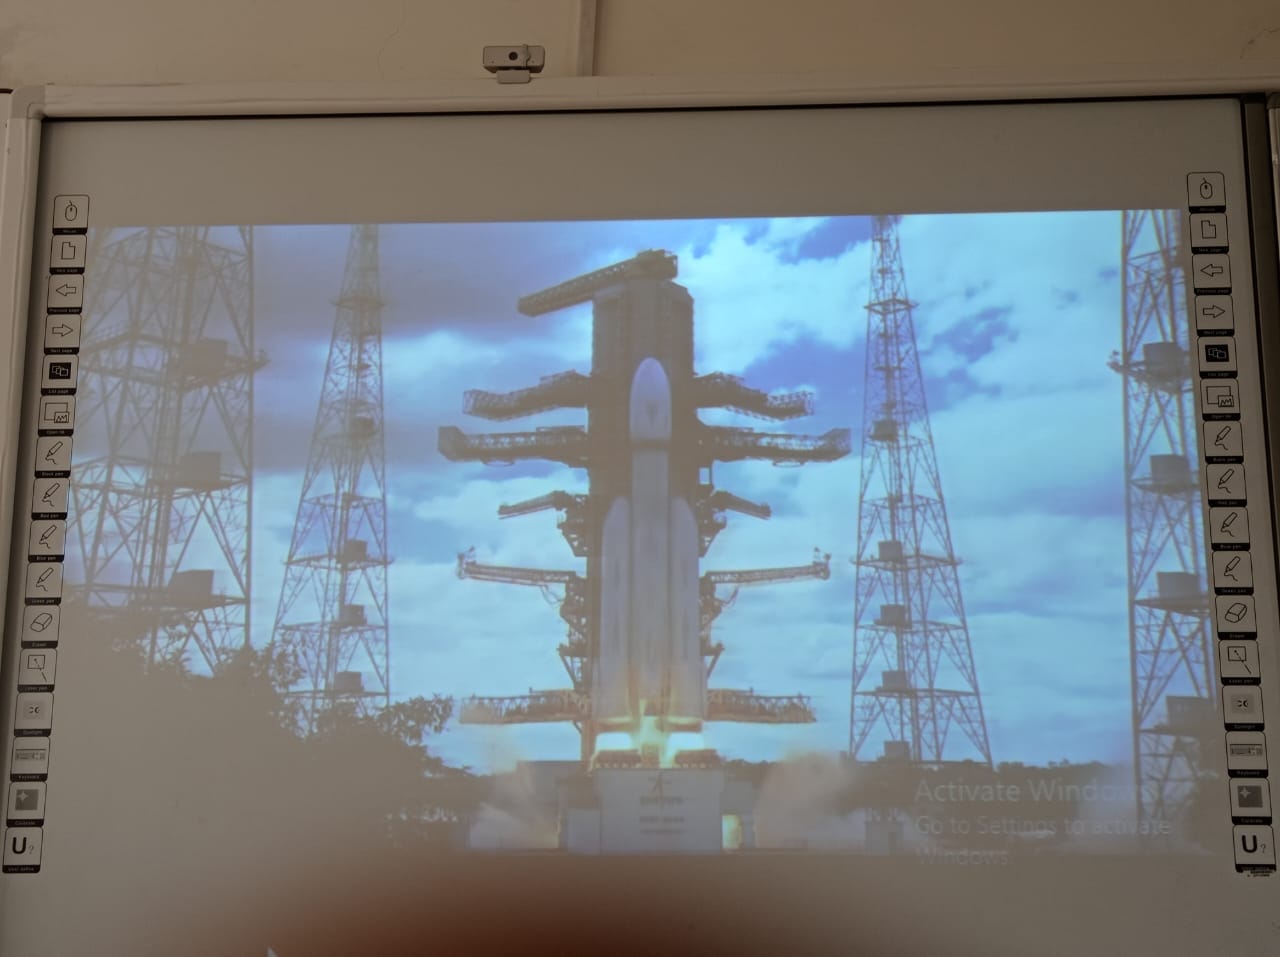 India successfully launched Chandrayaan-3